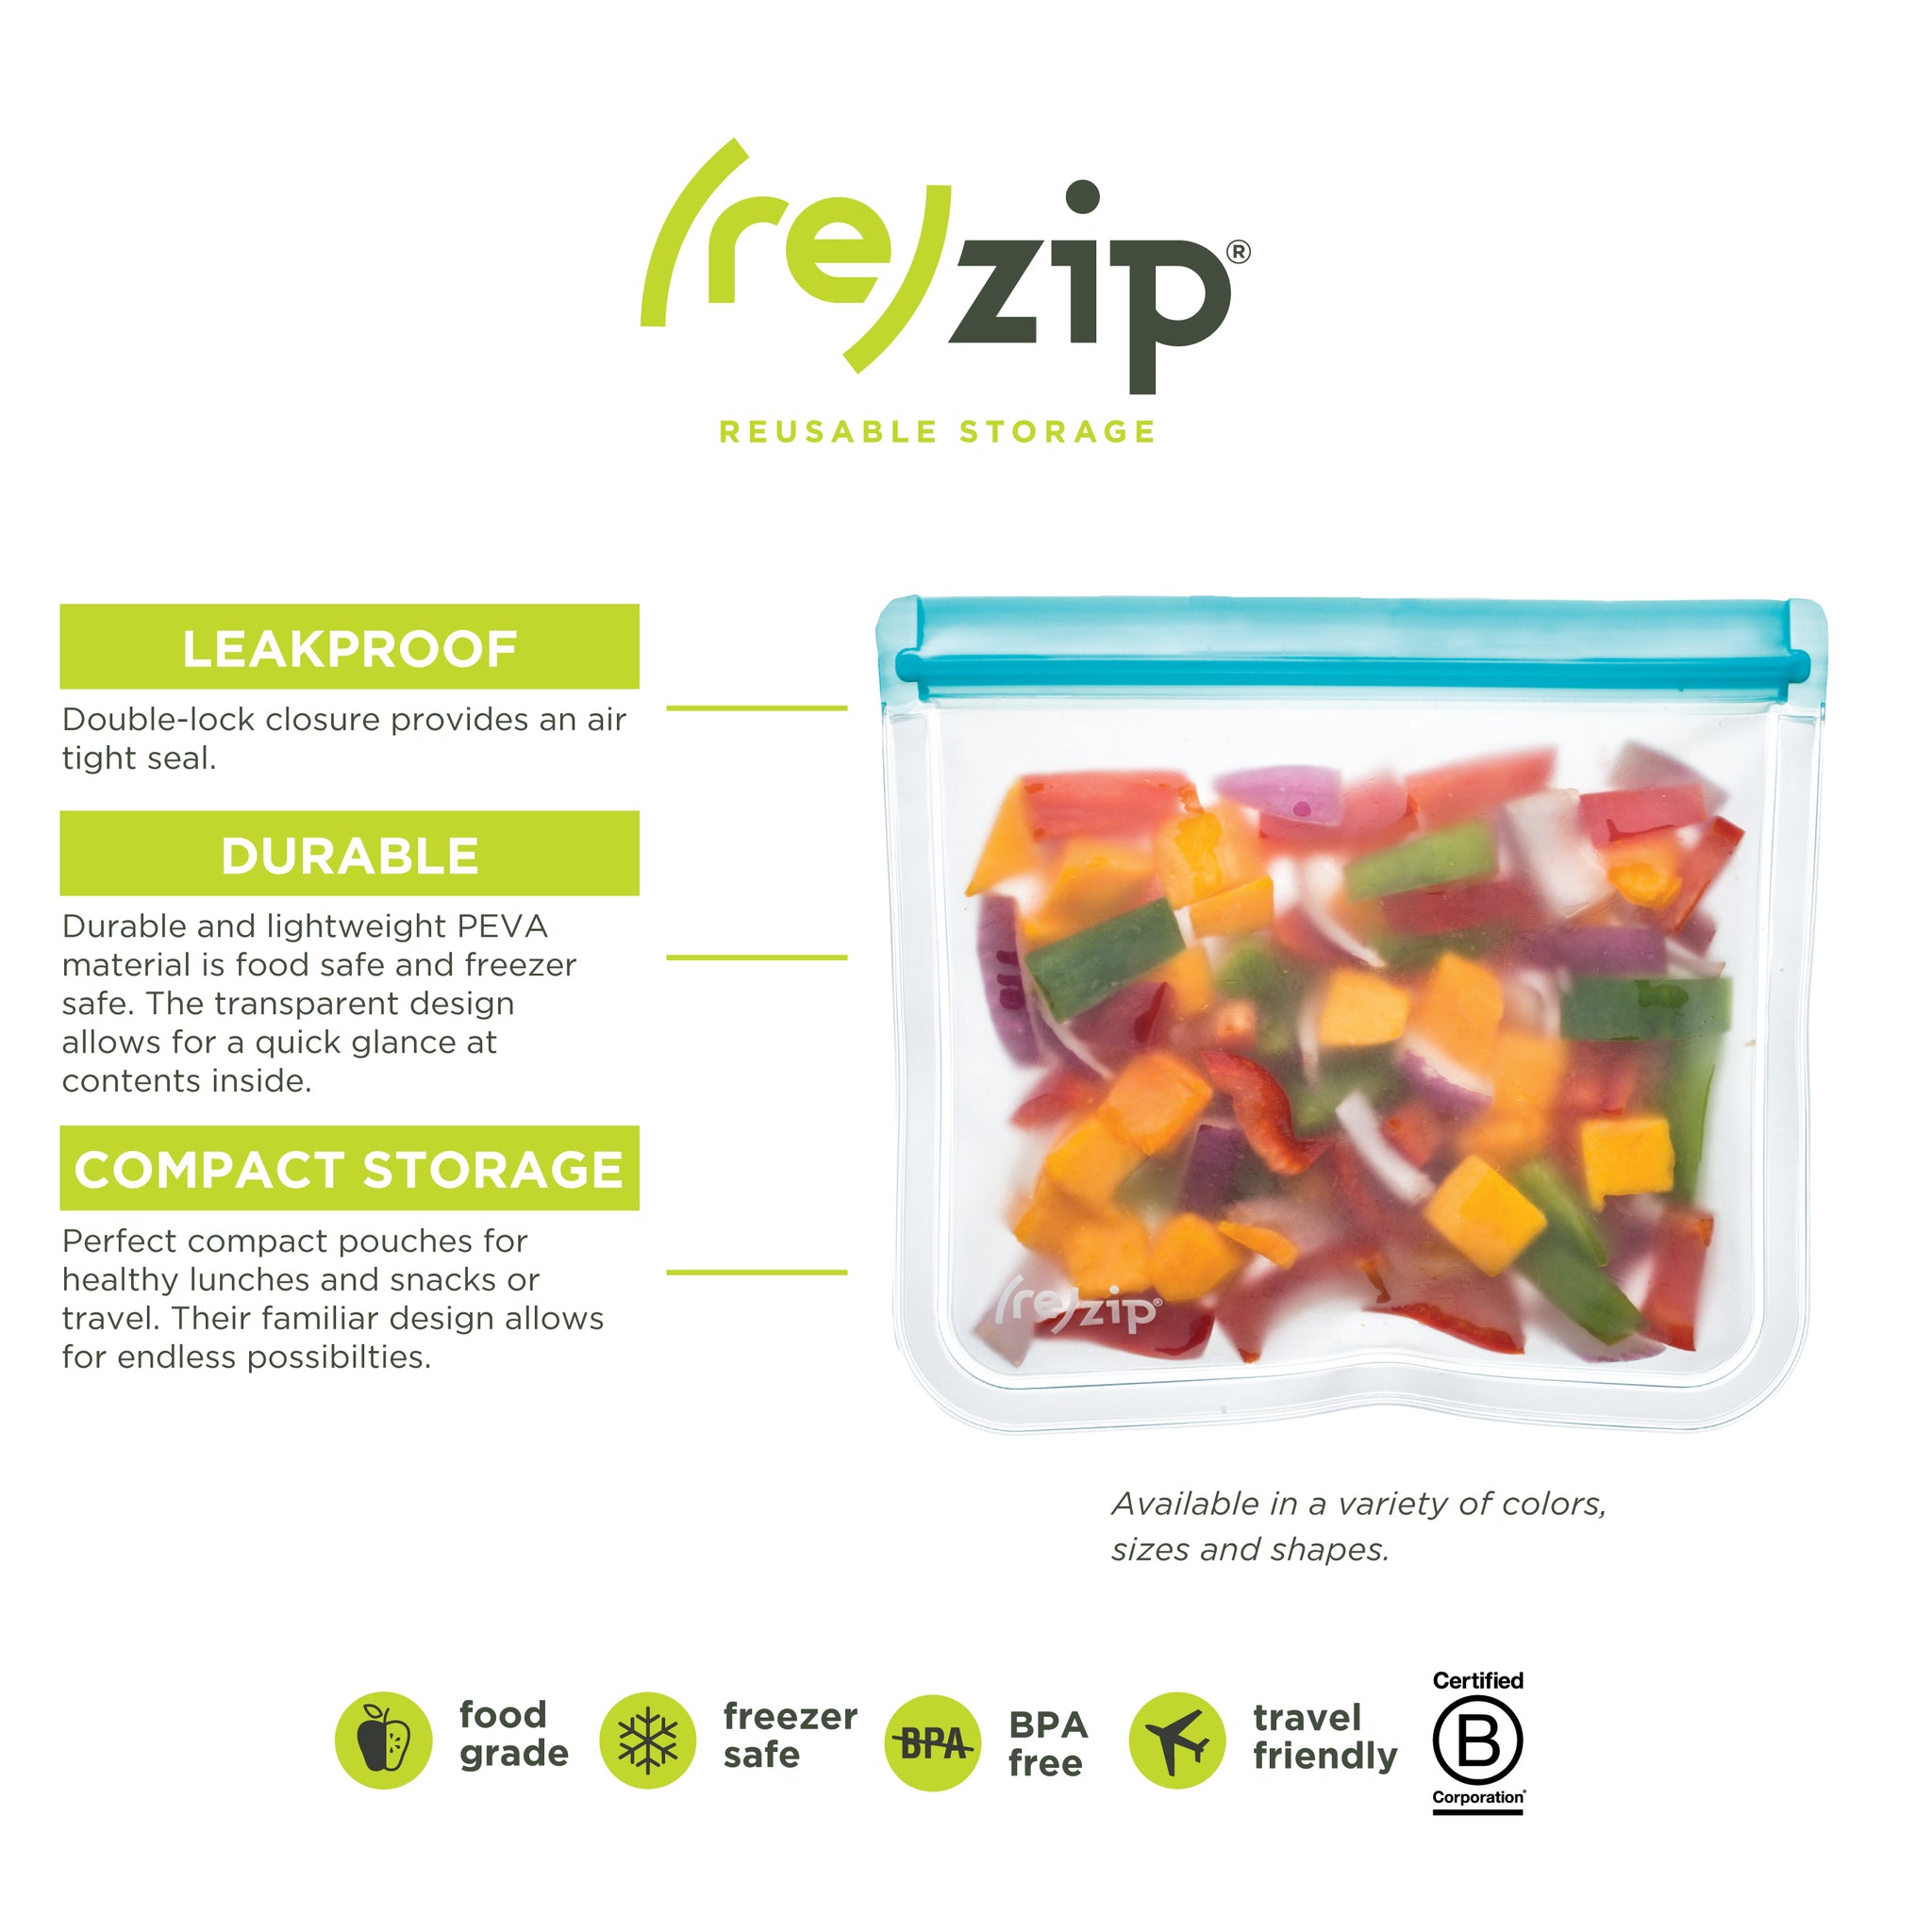 Reusable Snack Bag - Clear